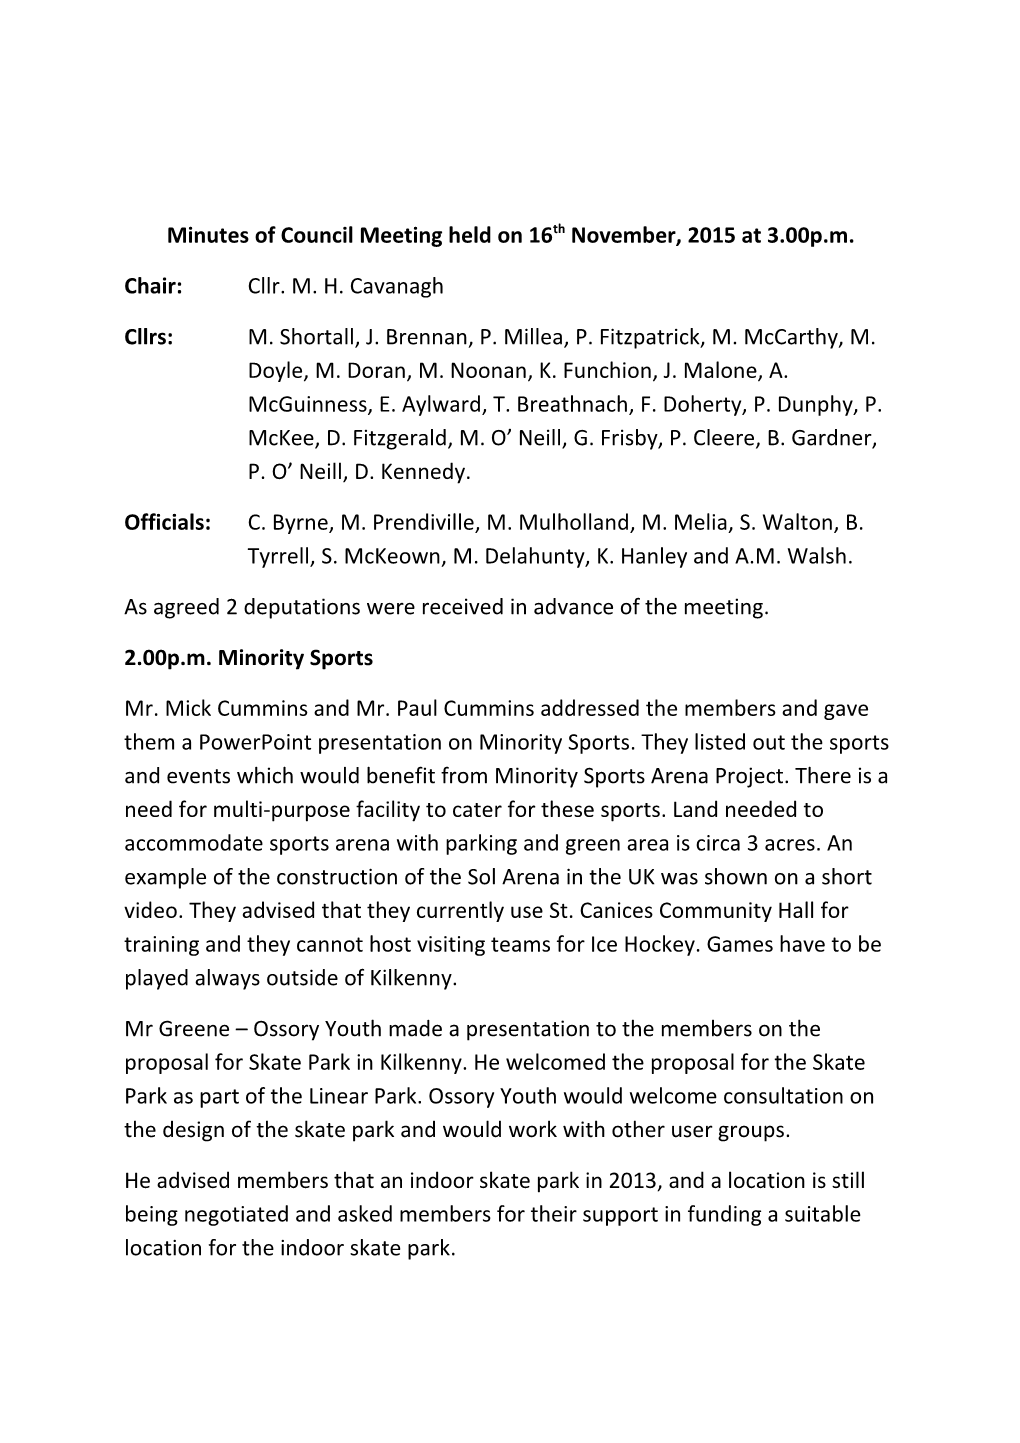 Minutes of Council Meeting Held on 16Th November, 2015 at 3.00P.M